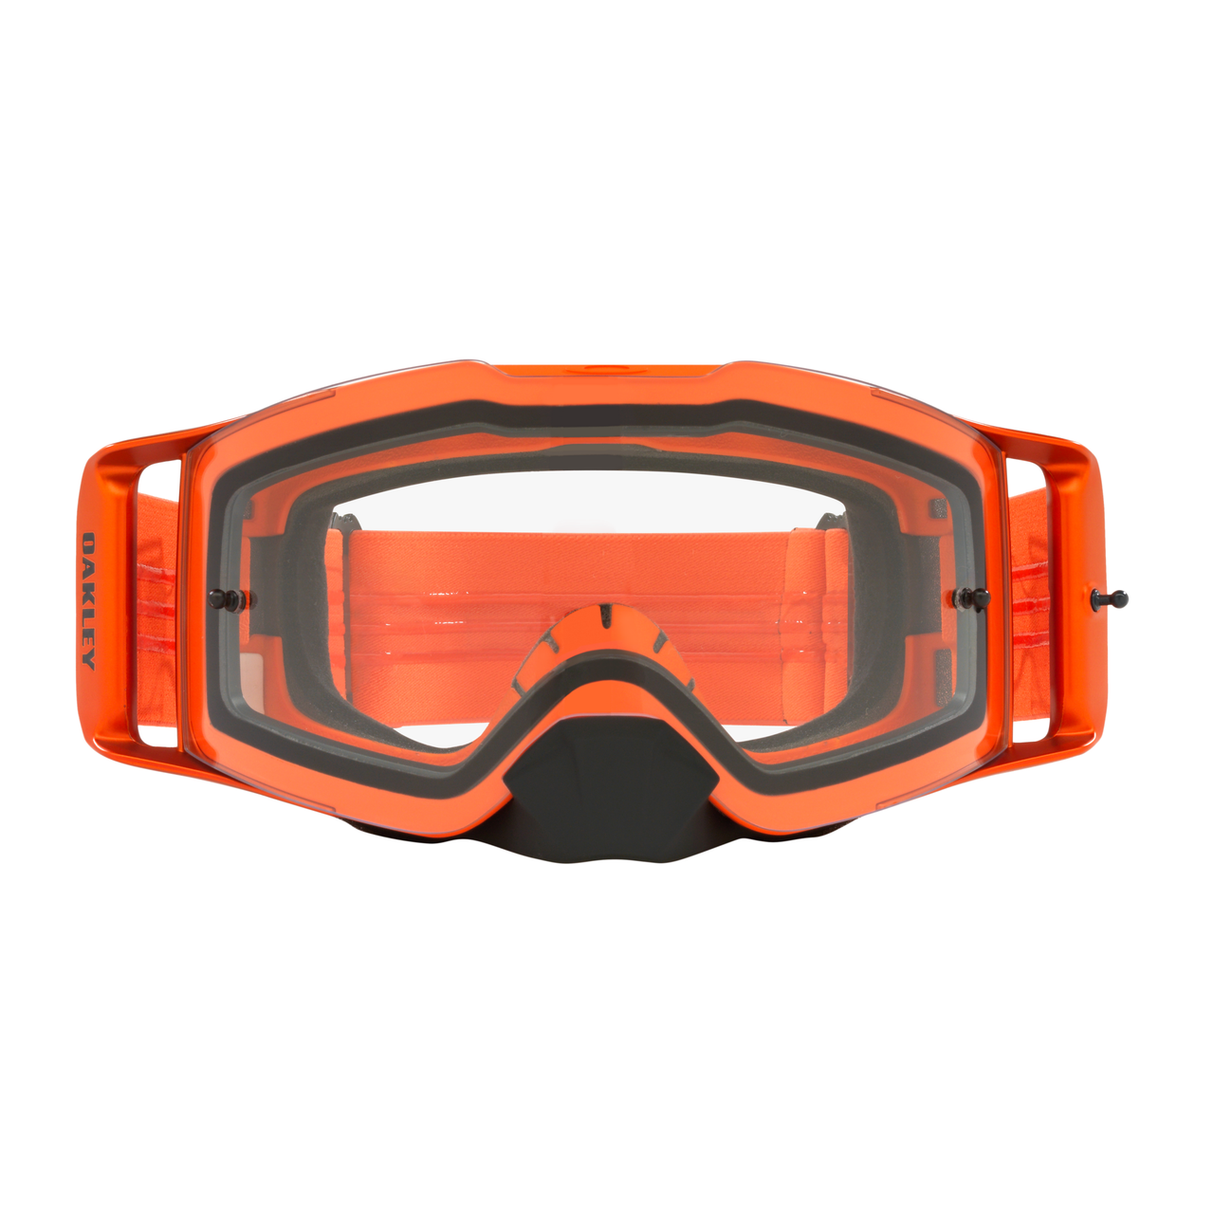 OAKLEY FRONT LINE MX GOGGLE CLEAR LENS